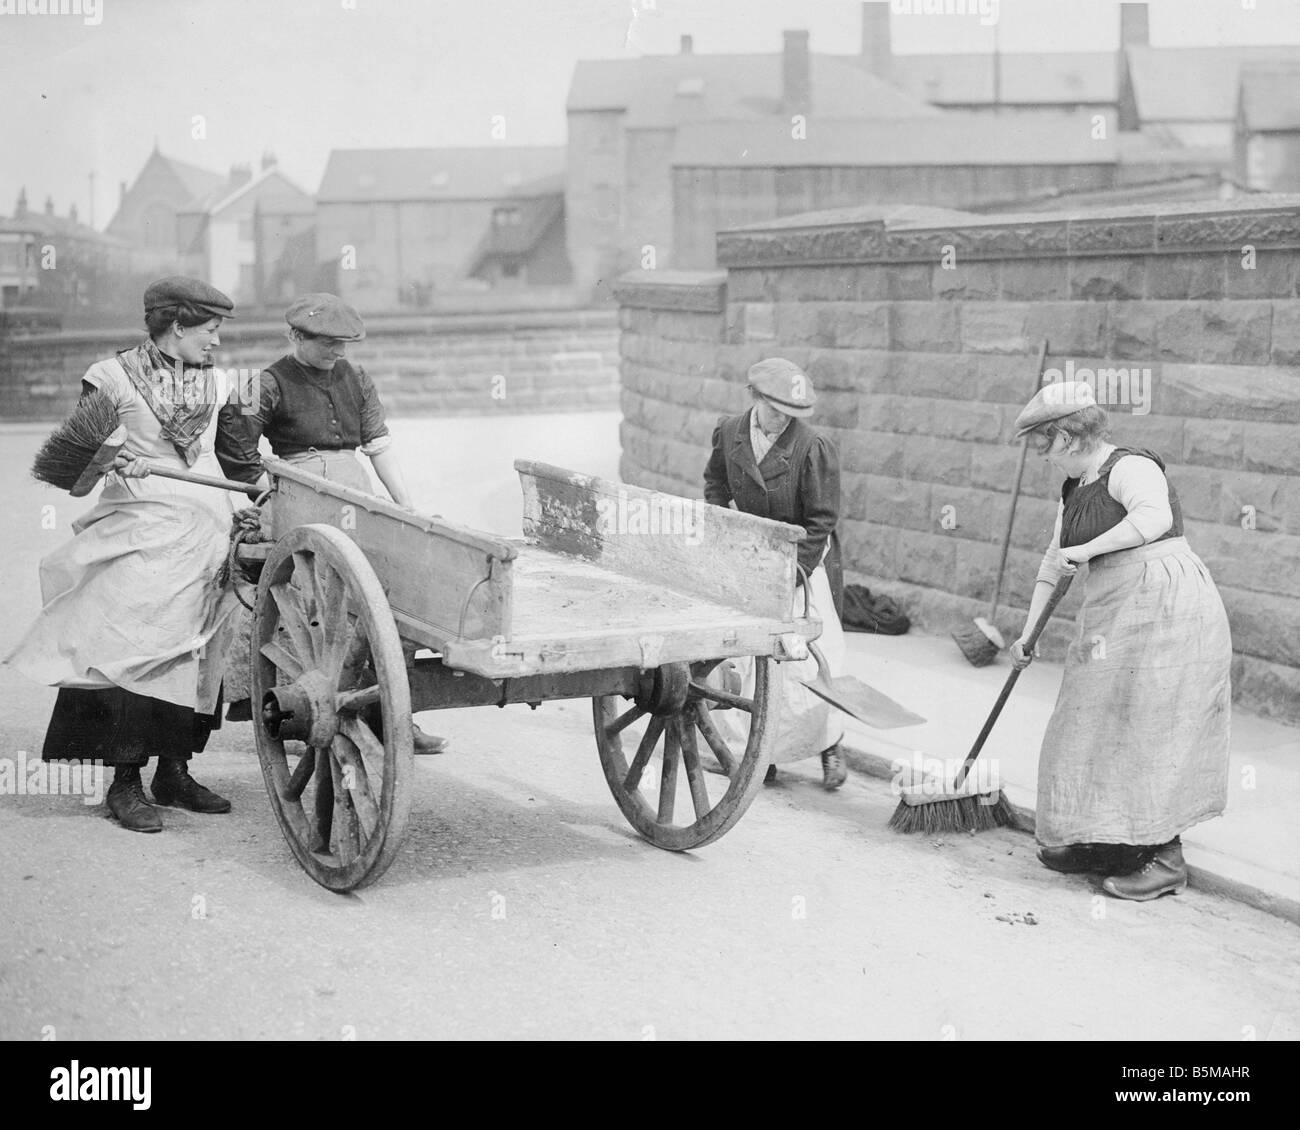 2 G55 W2 1916 England Women cleaning the streets 1916 History World War 1 War economy England Women cleaning the streets in Ches Stock Photo